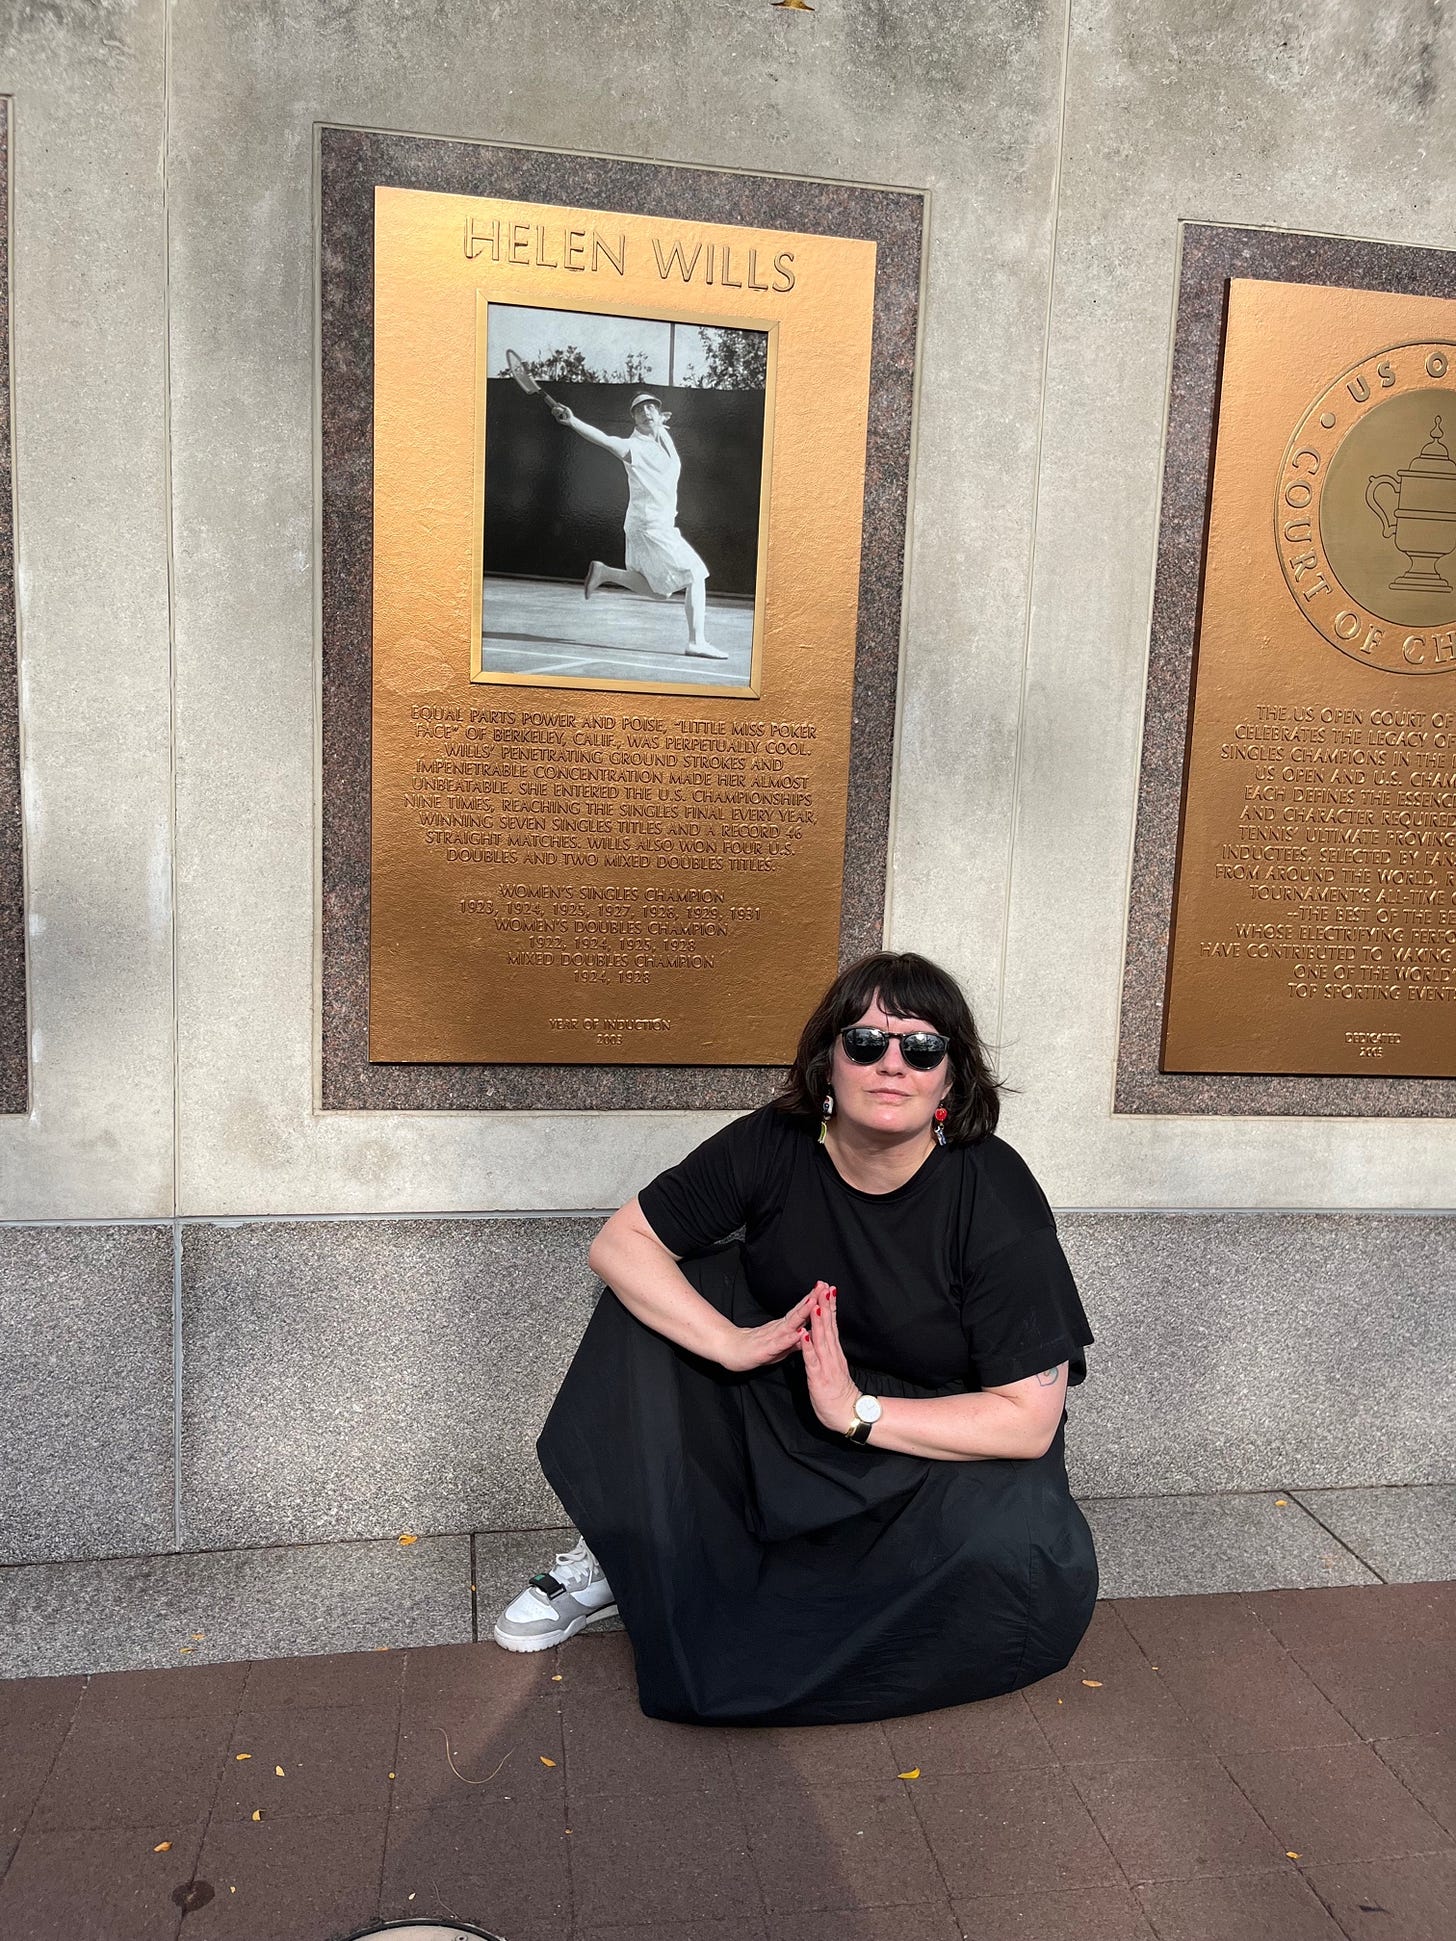 Me in a black dress and Chlorophyll Air Trainers kneeling in front of a plaque of tennis legend, Helen Wills, at the US Open.